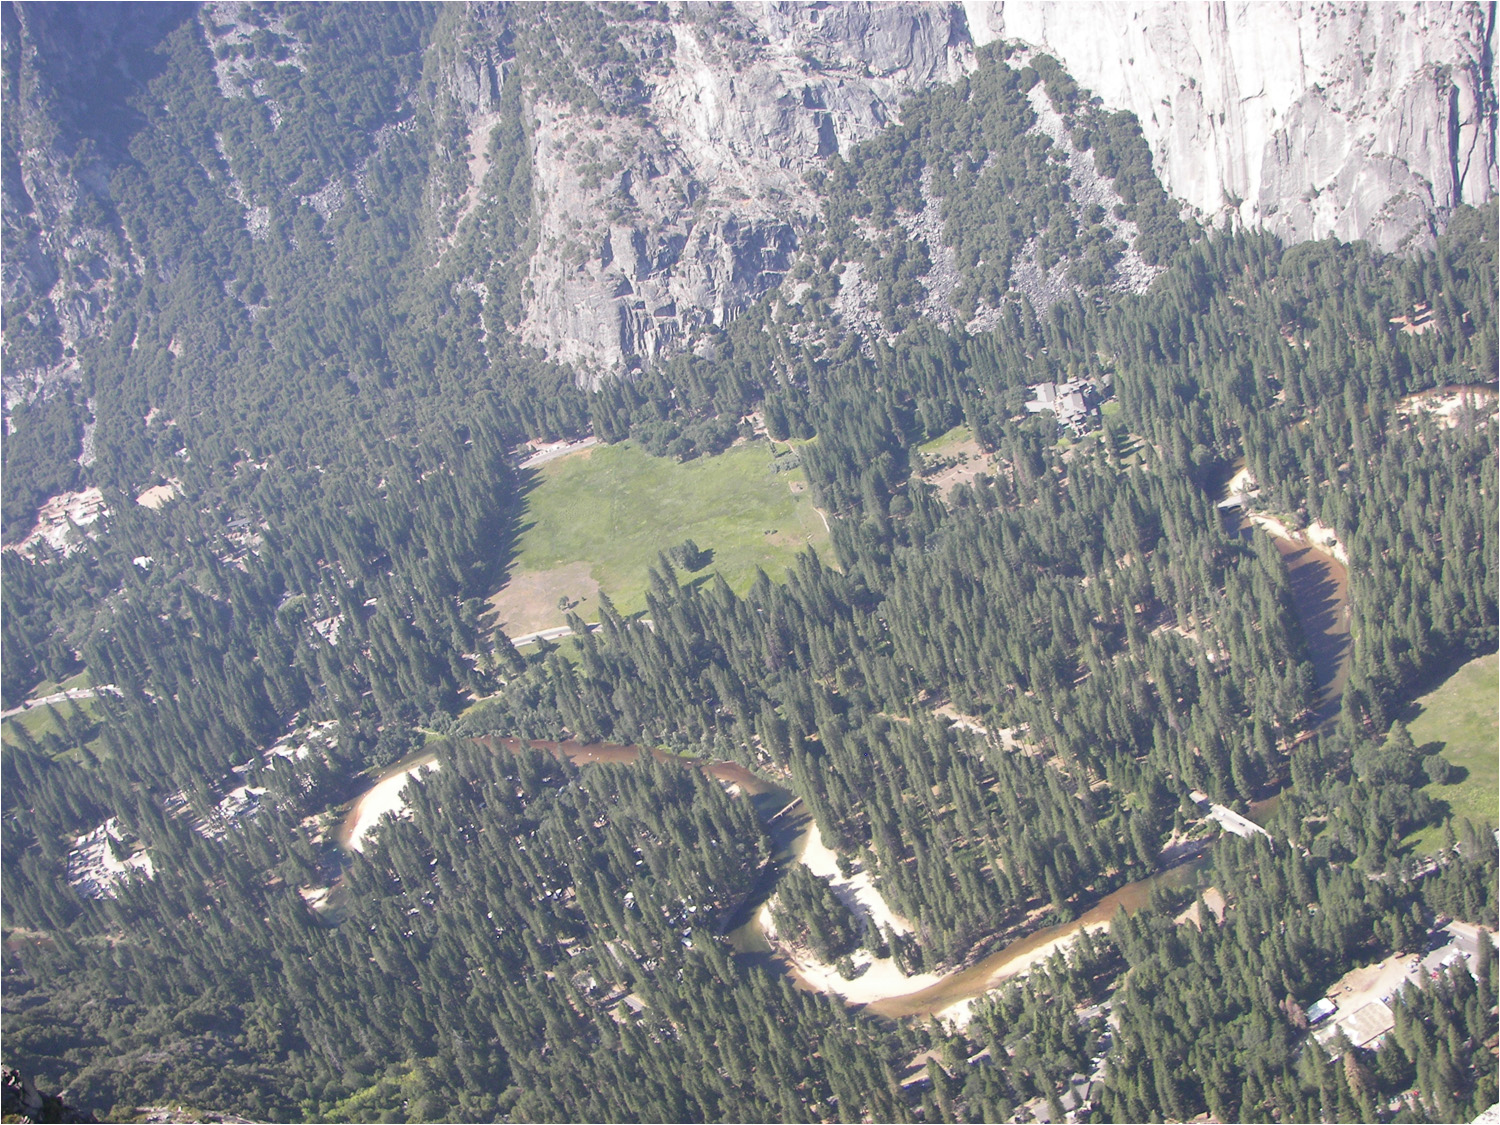 Glacier Point Hike-View of housekeeping from the Point